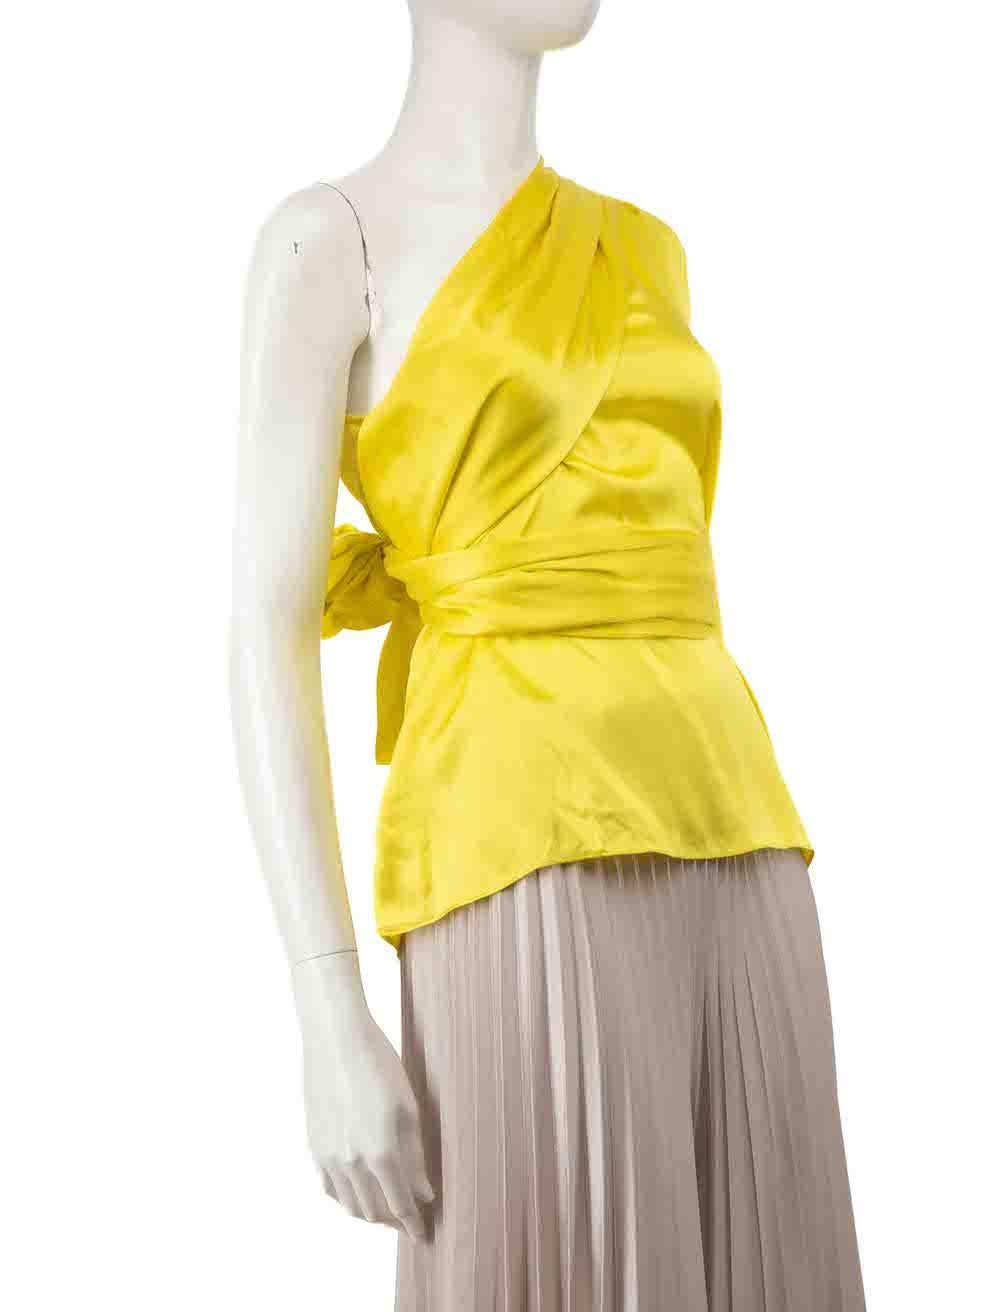 CONDITION is Very good. Minimal wear to top is evident. One side of the brand label has come unstitched on this used Solace London designer resale item.
 
 
 
 Details
 
 
 Yellow
 
 Silk
 
 Top
 
 One shoulder
 
 Long wide sleeve
 
 Side zip